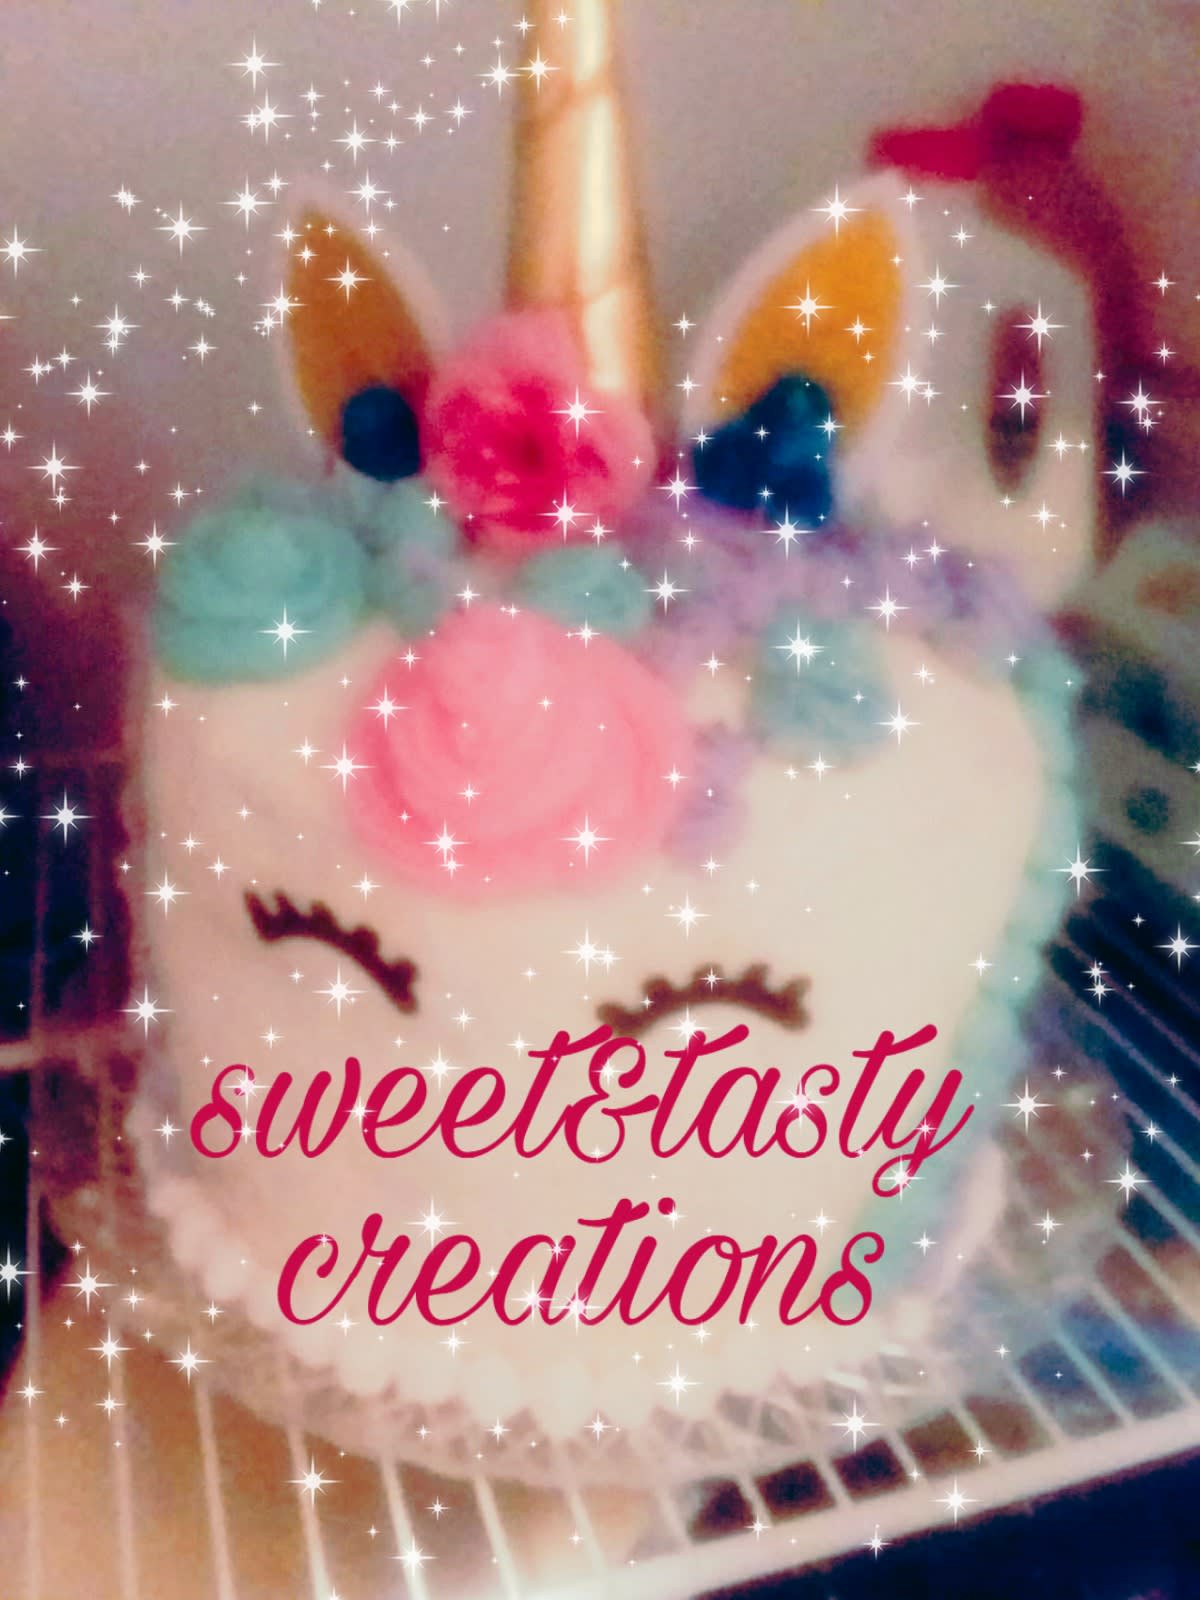 Sweet and tasty creations